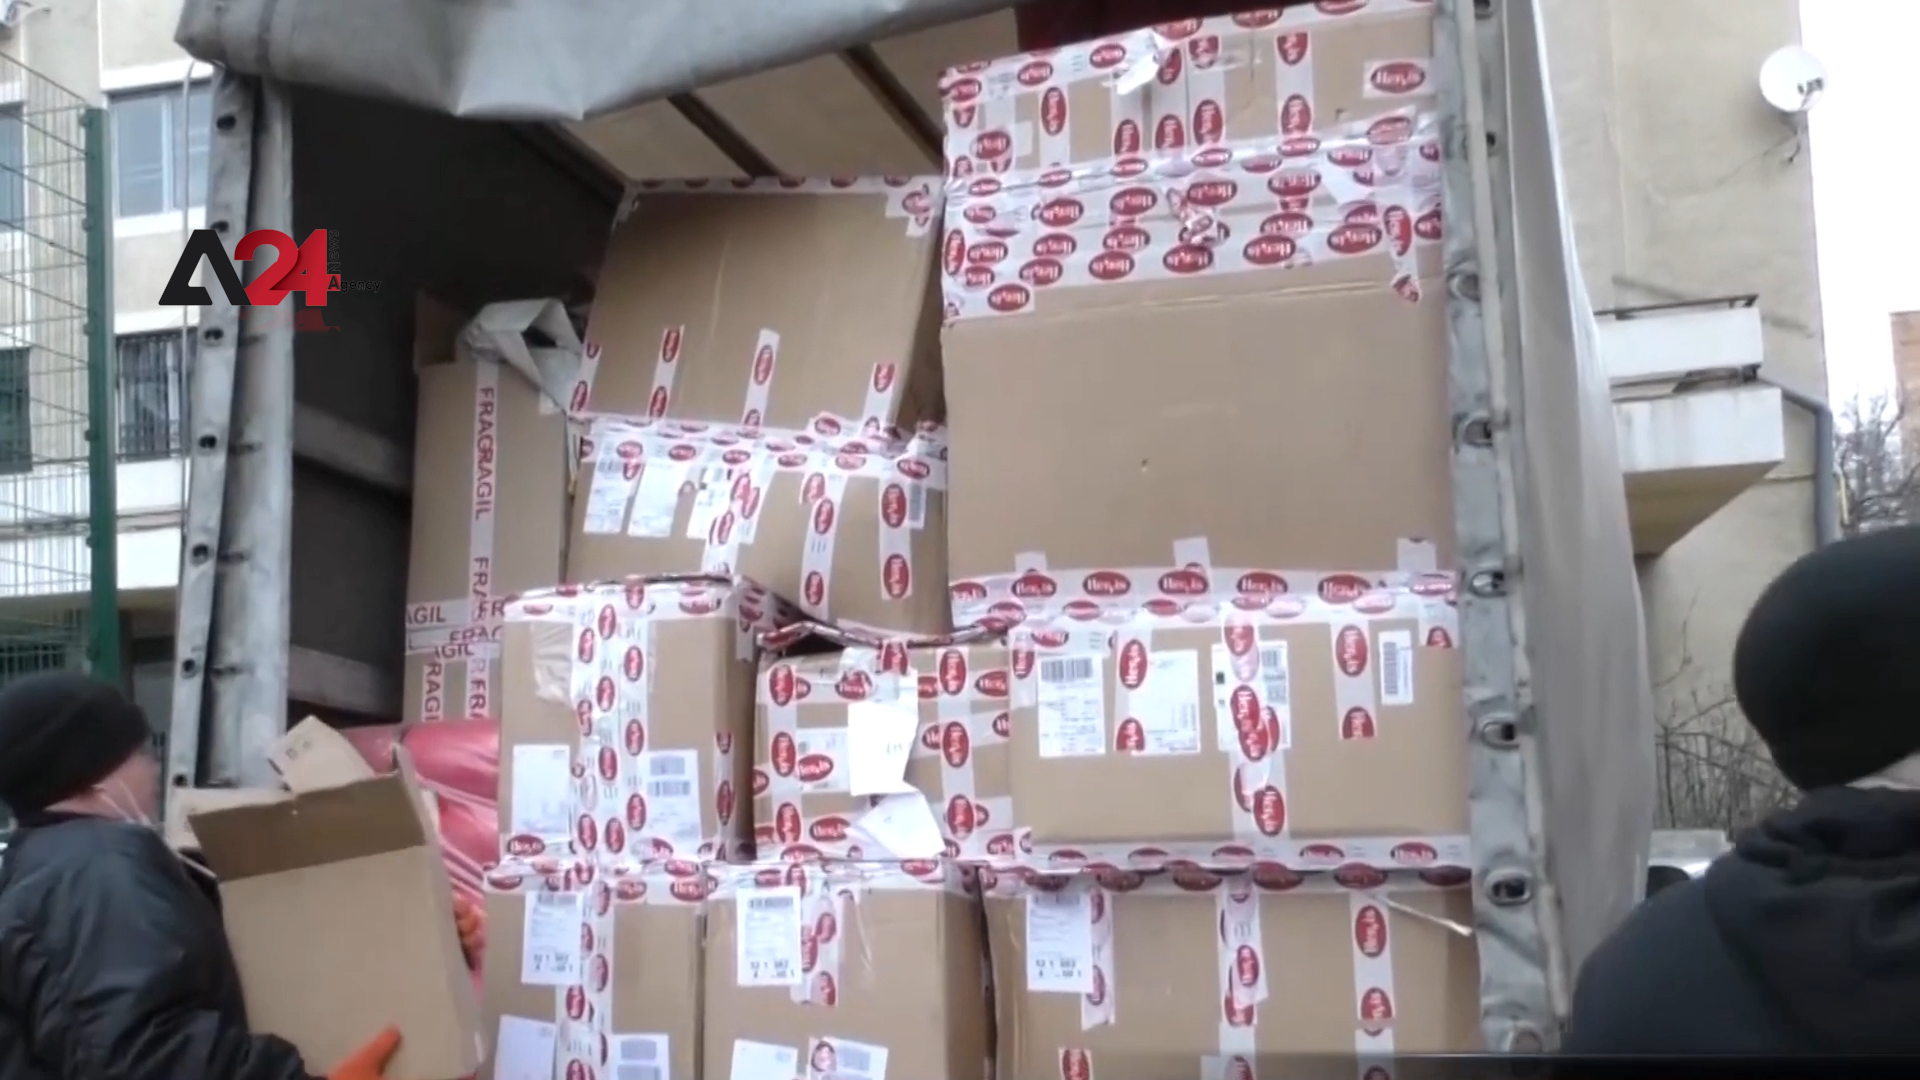 Ukraine - Warehouses become center for receiving and distributing aid